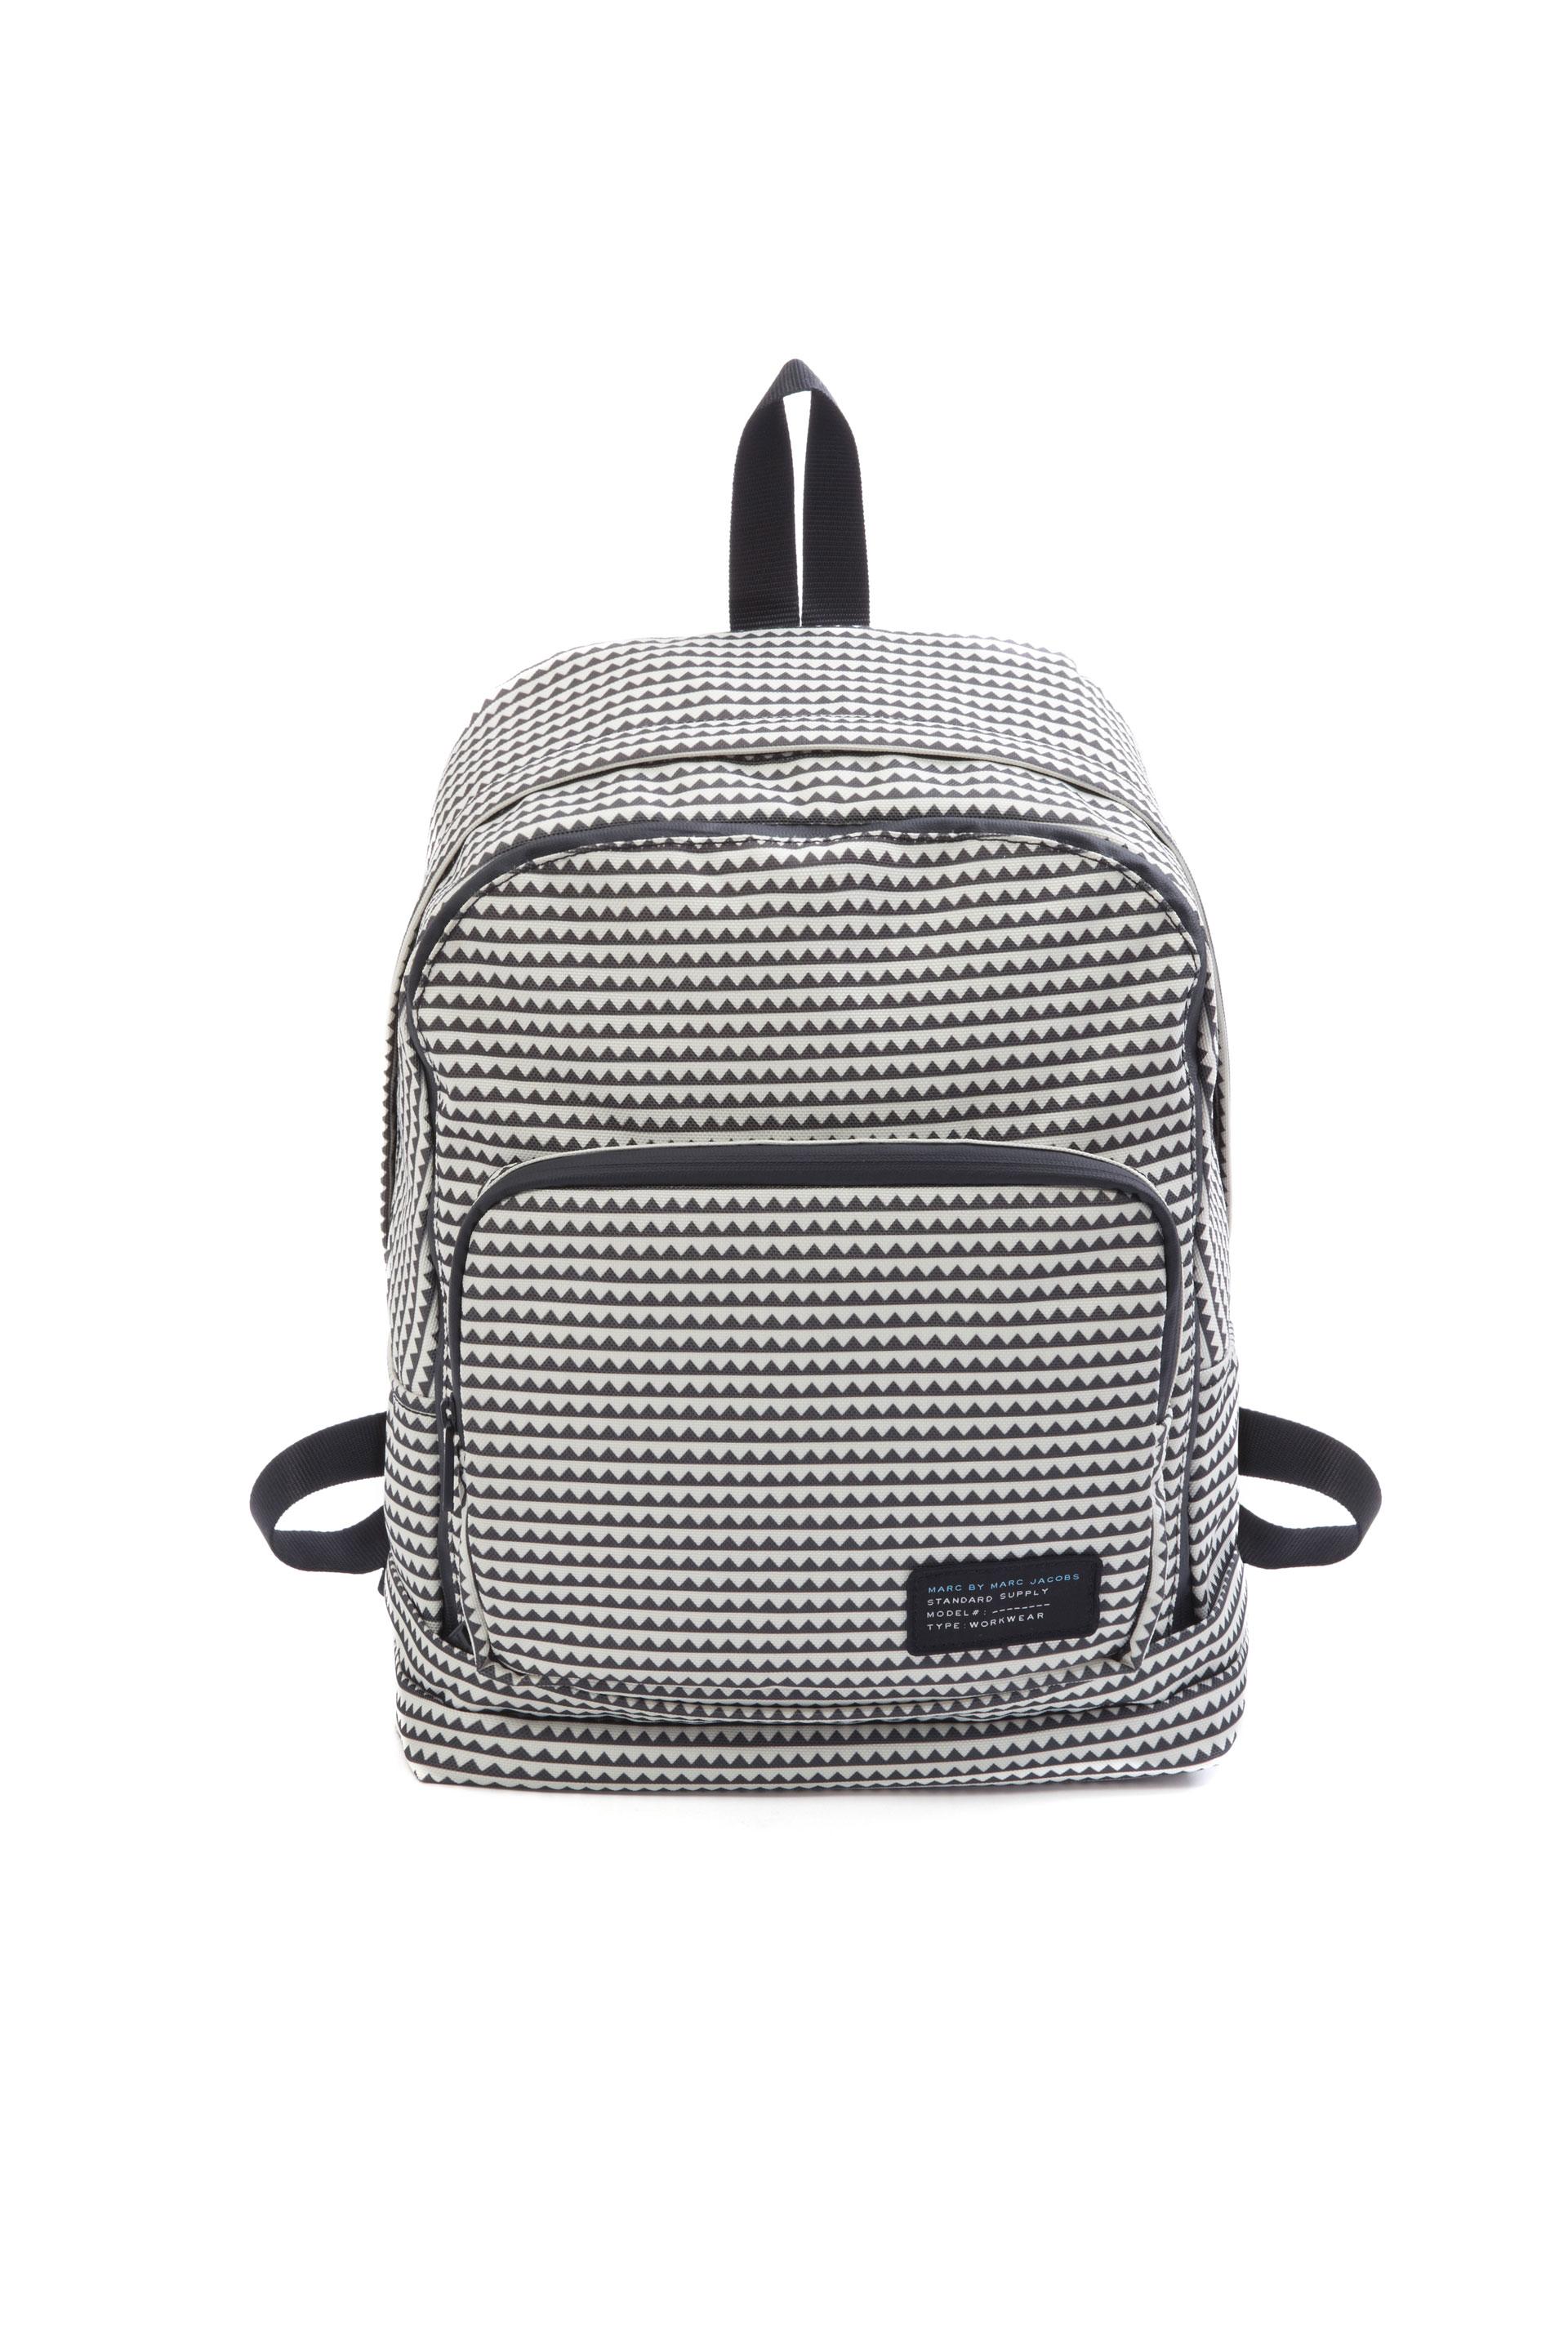 Backpack by MARC by MARC JACOBS